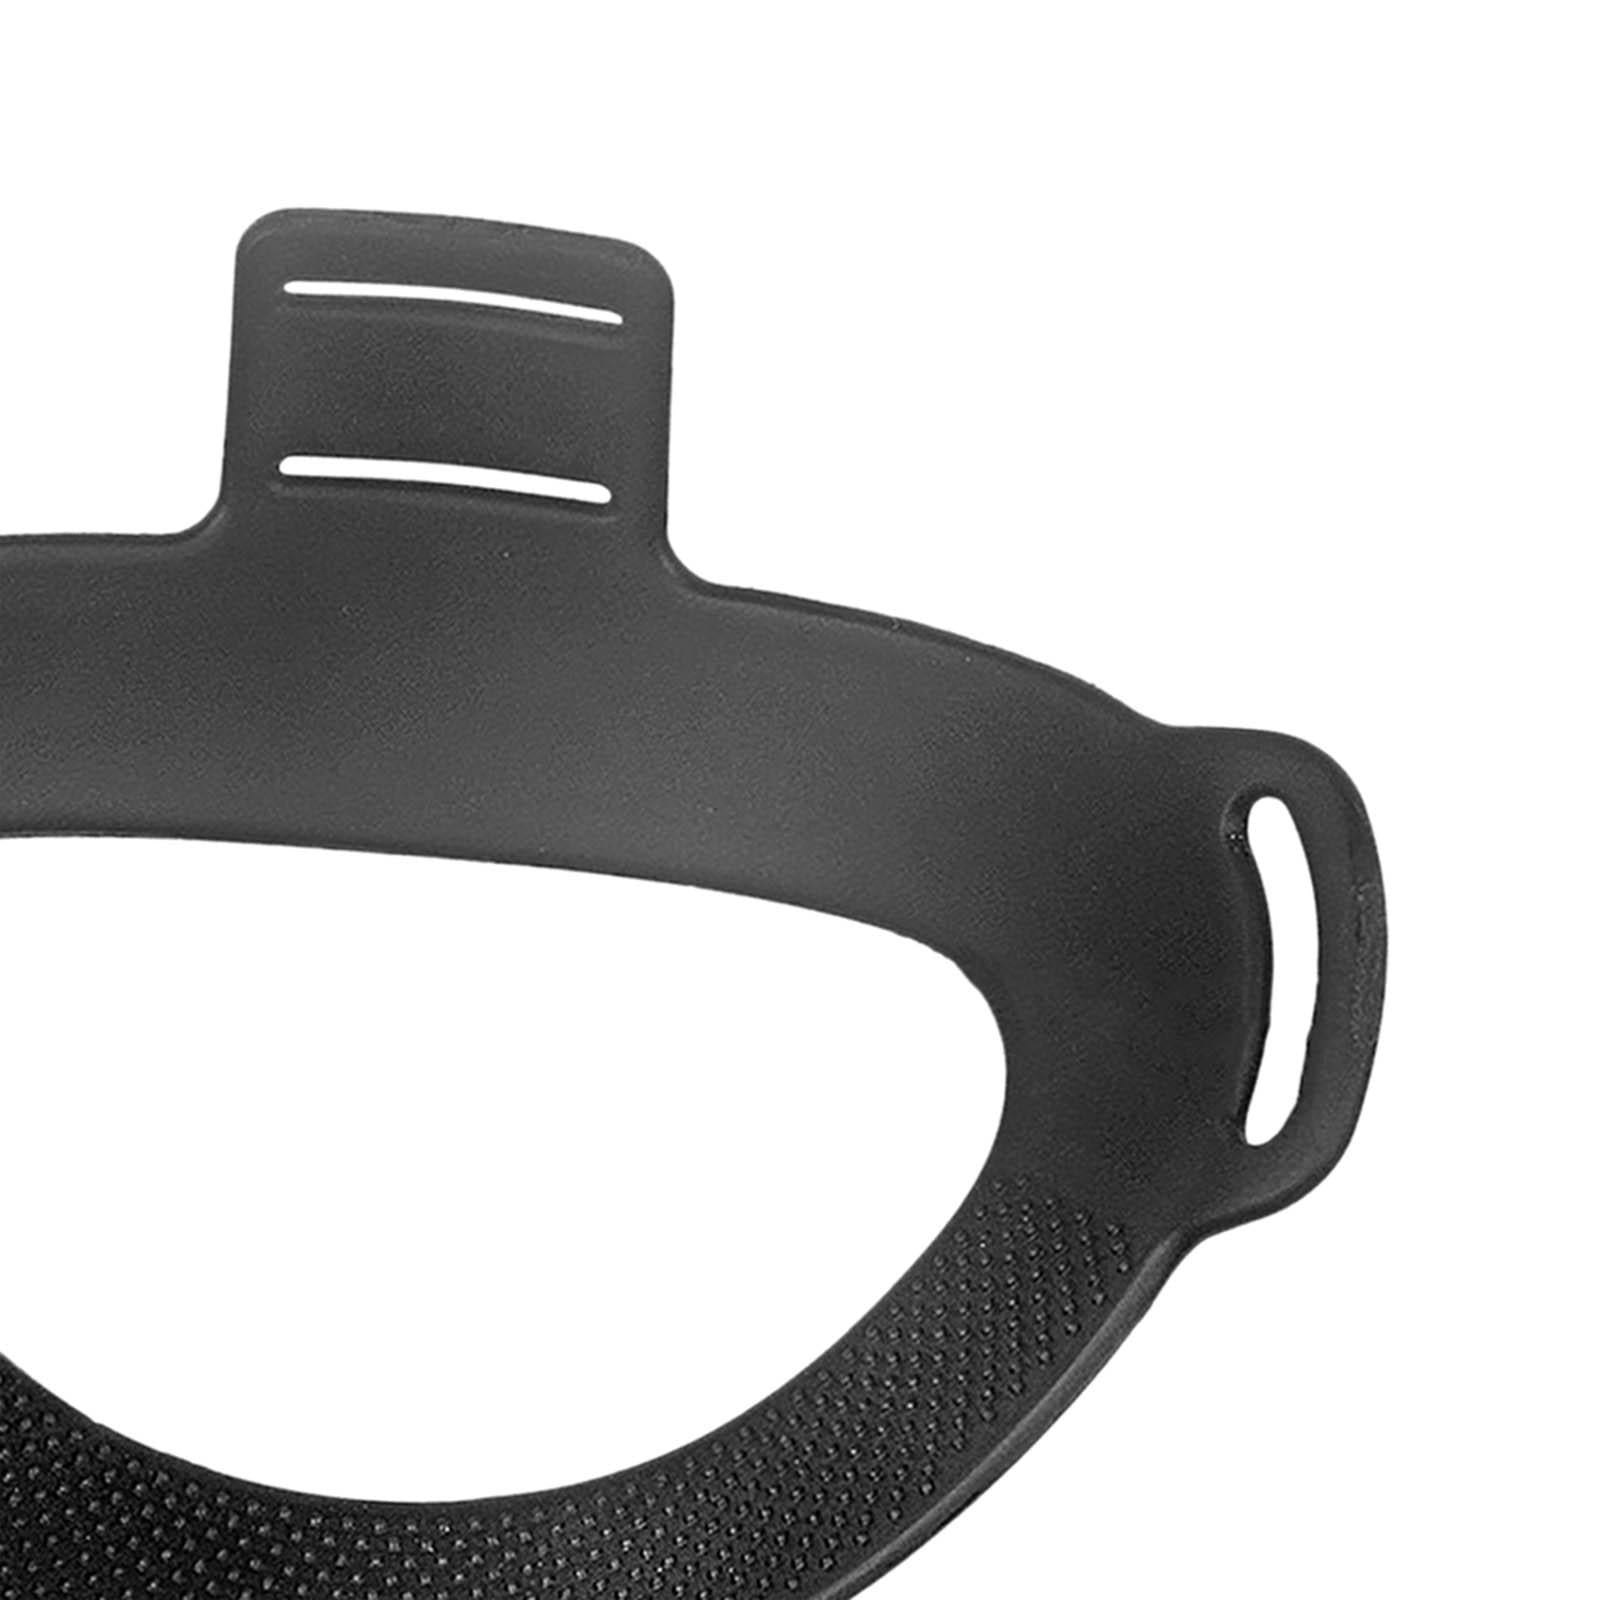 Soft Headband Cushion for Quest 2 VR Headset Removable TPU Protective Strap